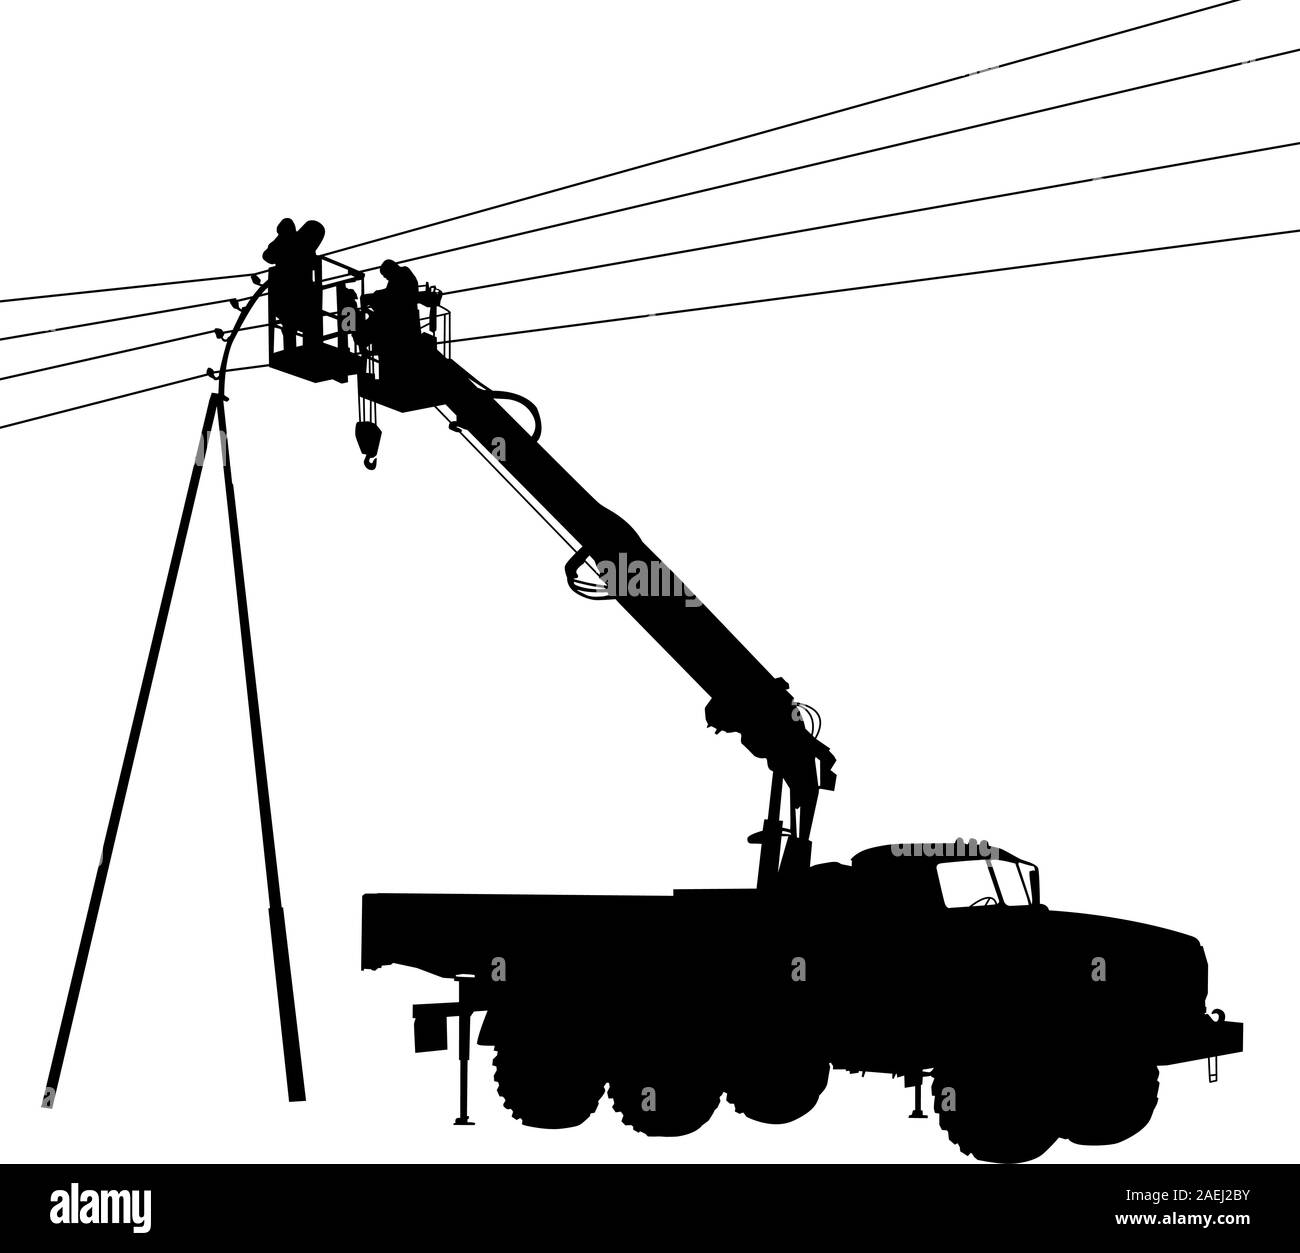 Electrician, making repairs at a power pole. Vector illustration. Stock Vector